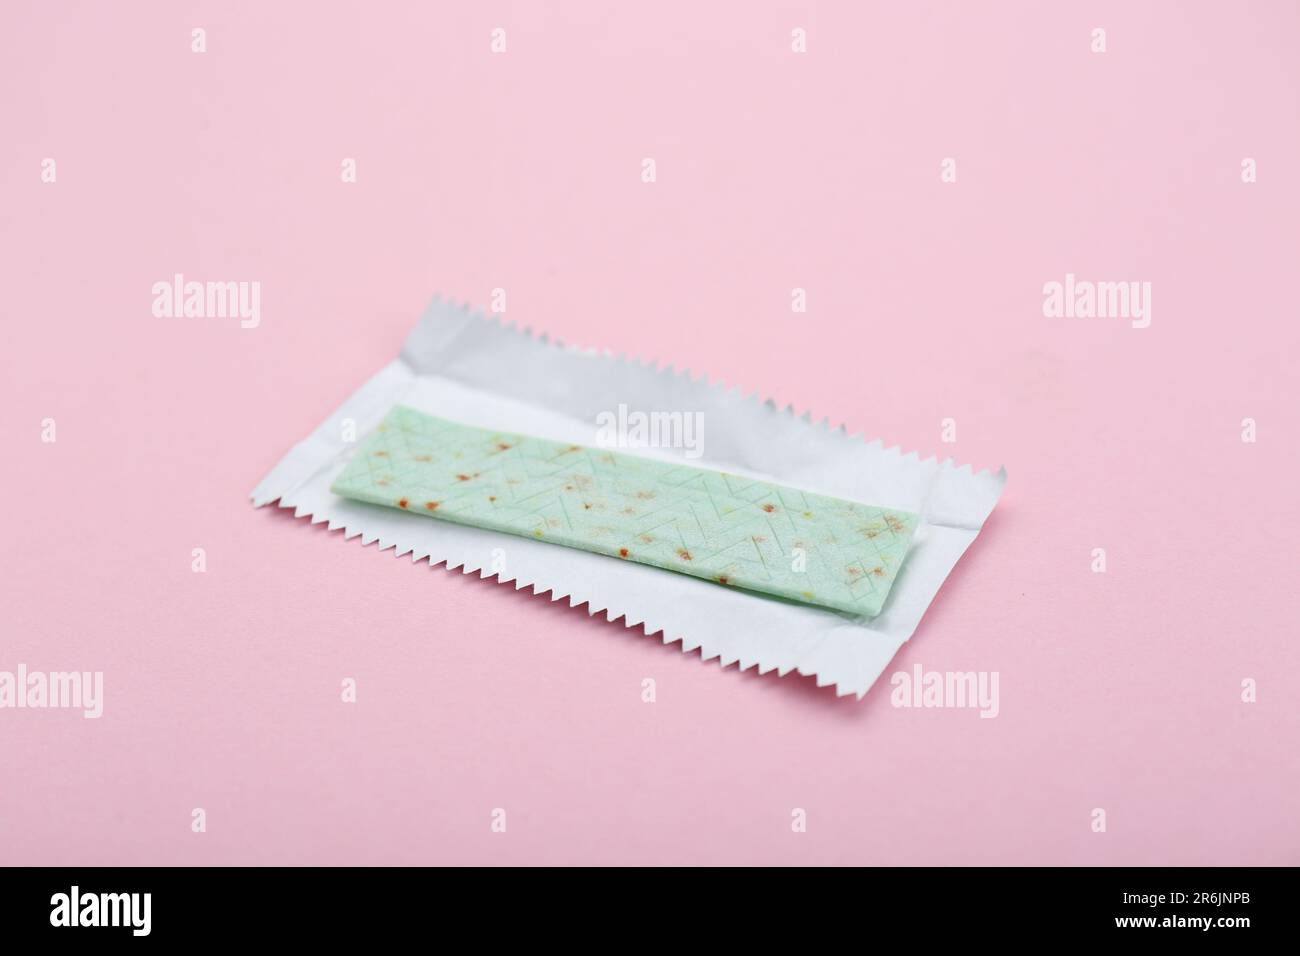 Unwrapped stick of chewing gum on pink background, closeup Stock Photo